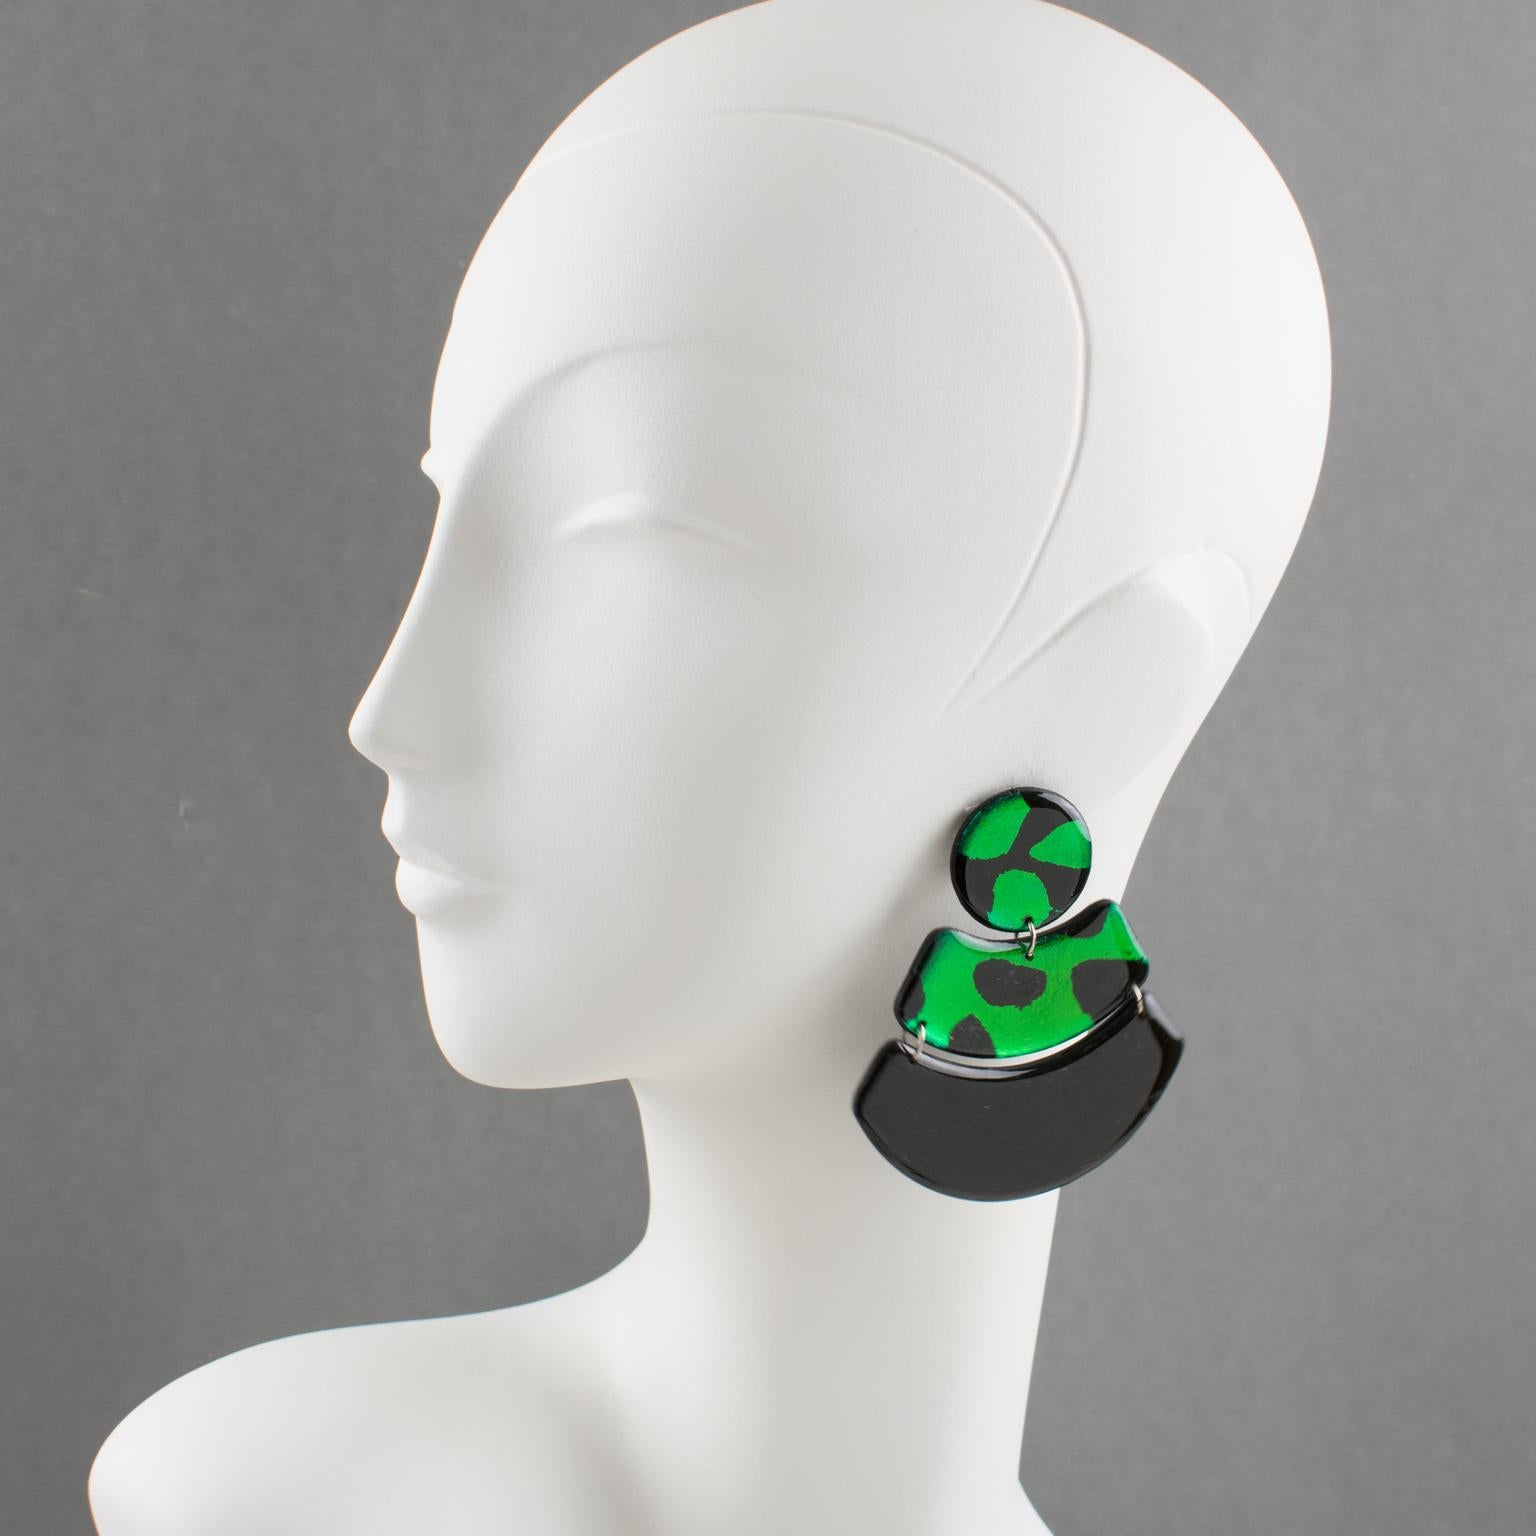 These stunning Lucite or Resin dangling resin clip-on earrings feature a massive fan shape with articulated designs. The pieces boast black and shamrock green colors. Those earrings are a total eye-catching Pop Art statement. There is no visible